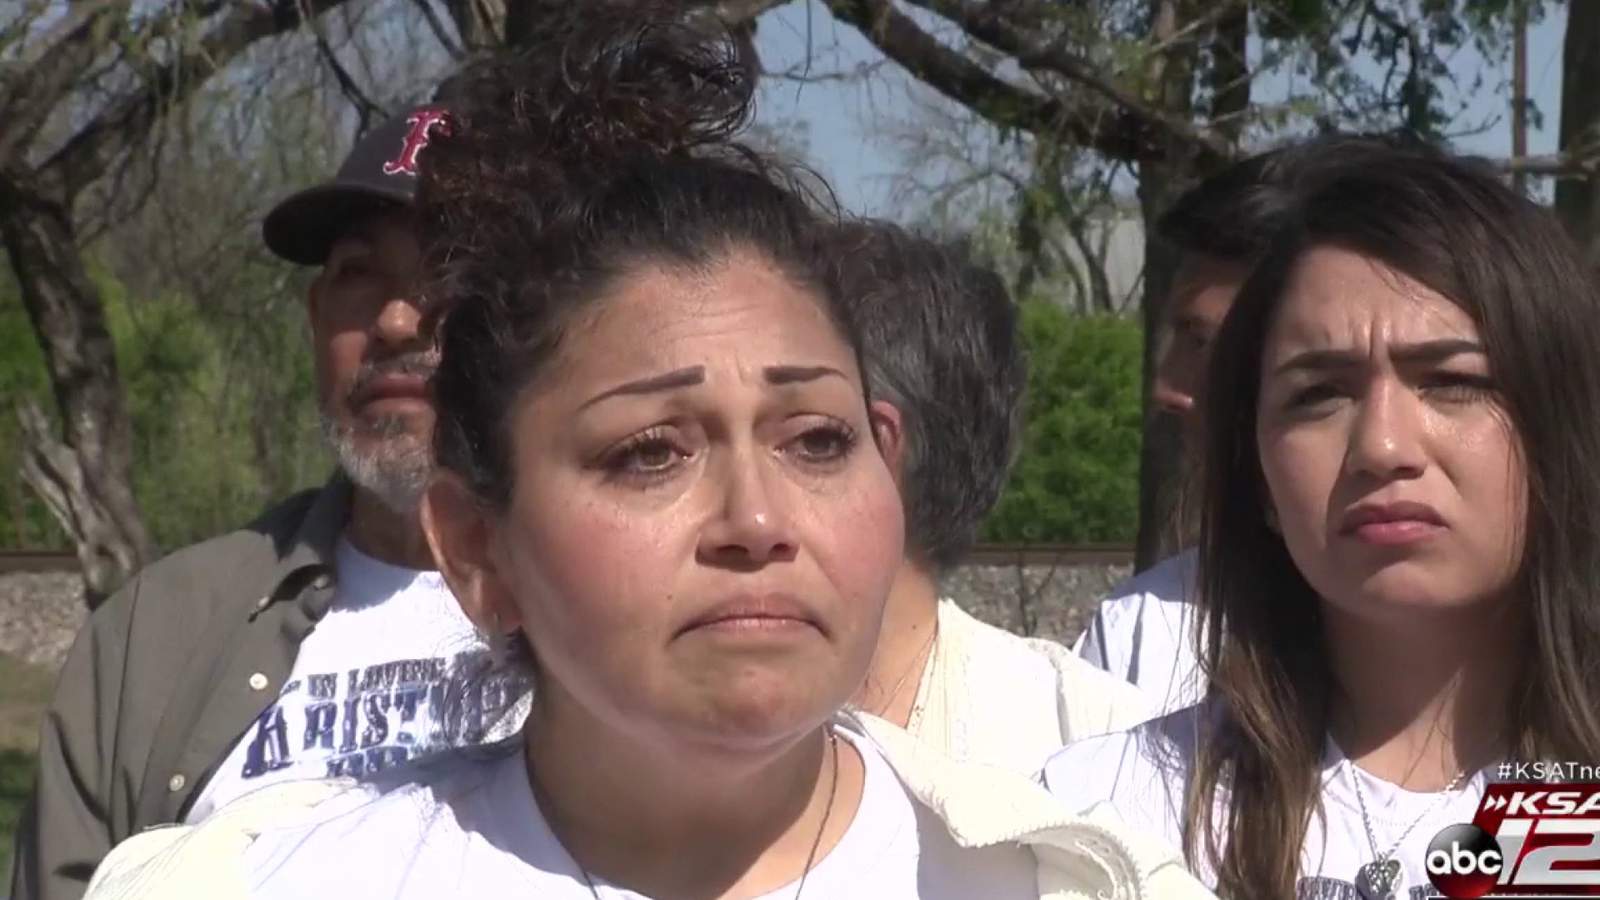 San Antonio mother frustrated with Bexar County justice system one year after son’s death